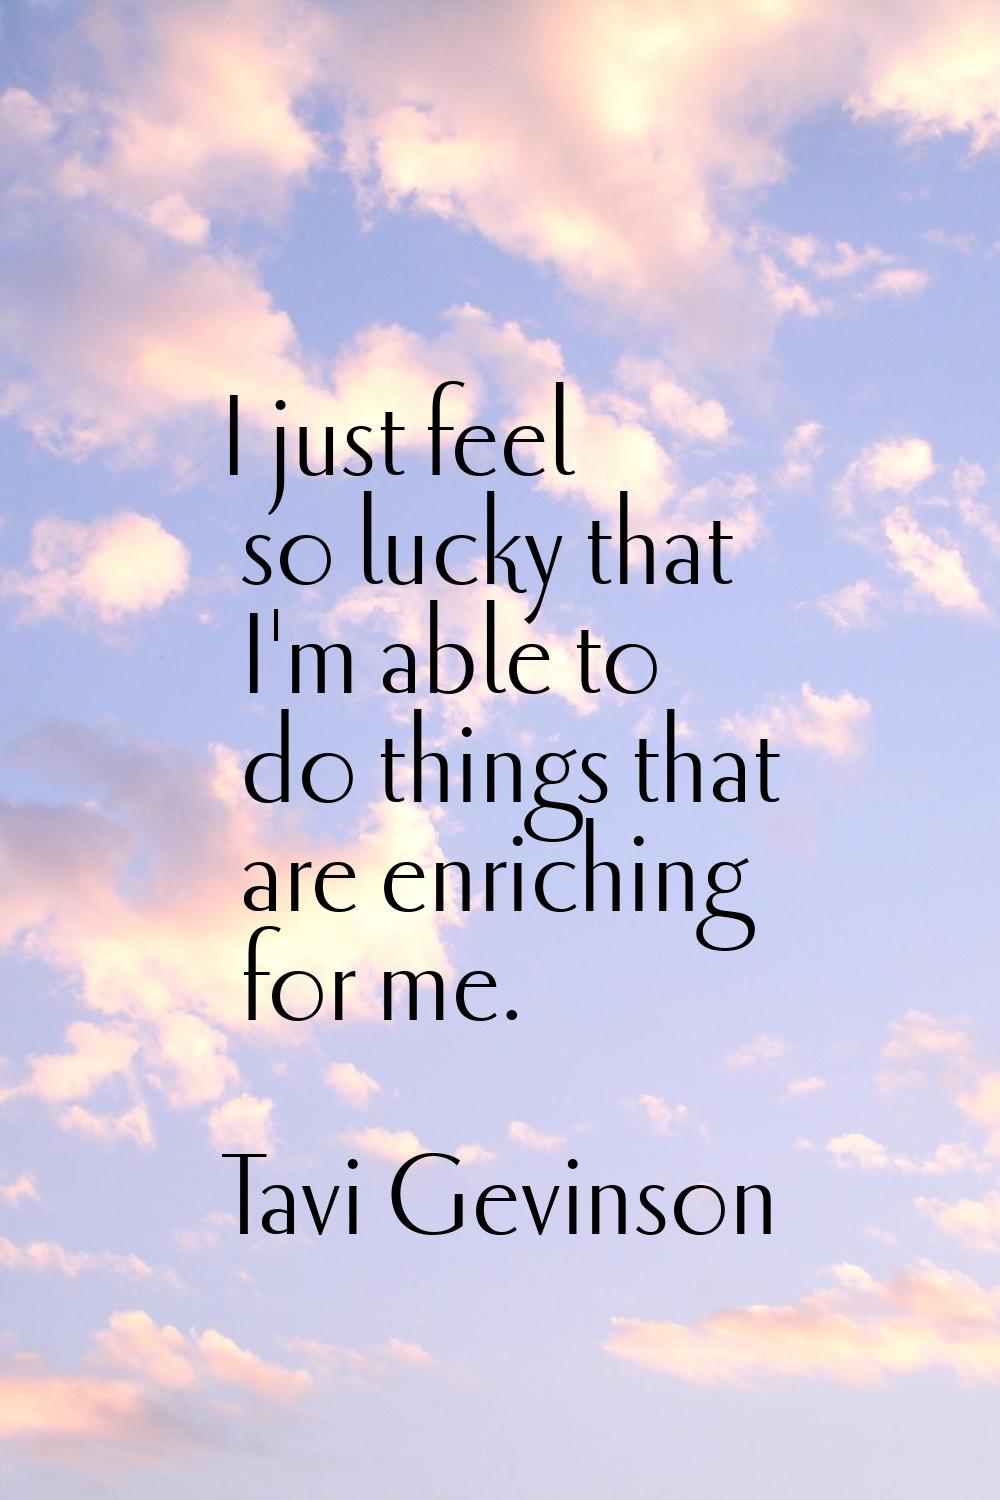 I just feel so lucky that I'm able to do things that are enriching for me.